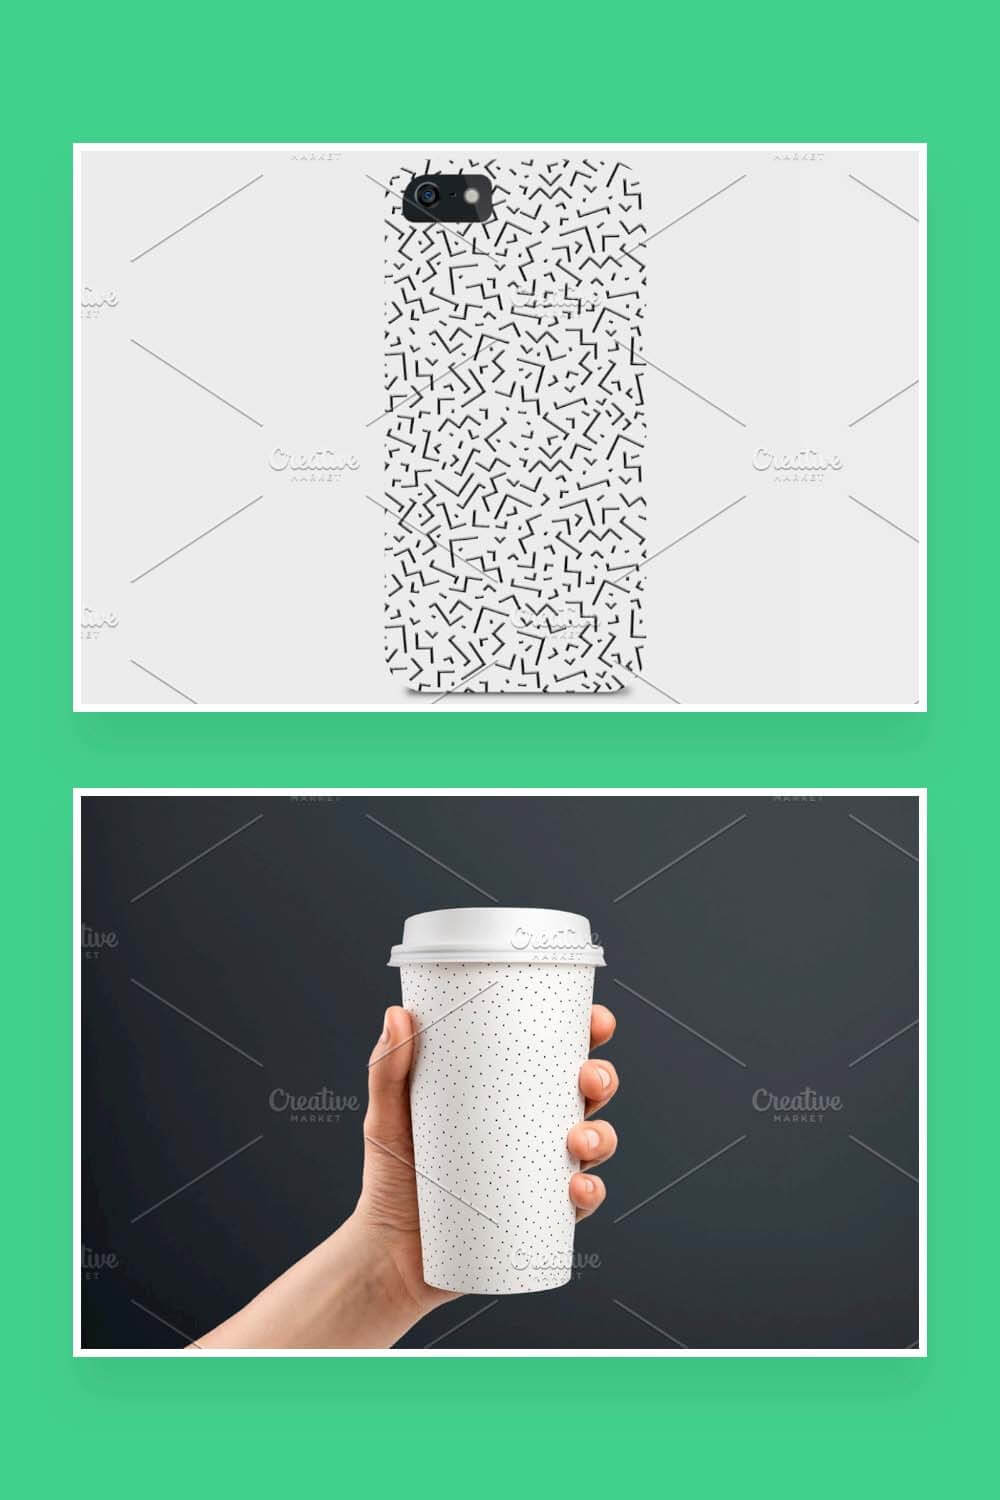 Two samples of seamless patterns in one picture with a phone case and a cardboard glass.